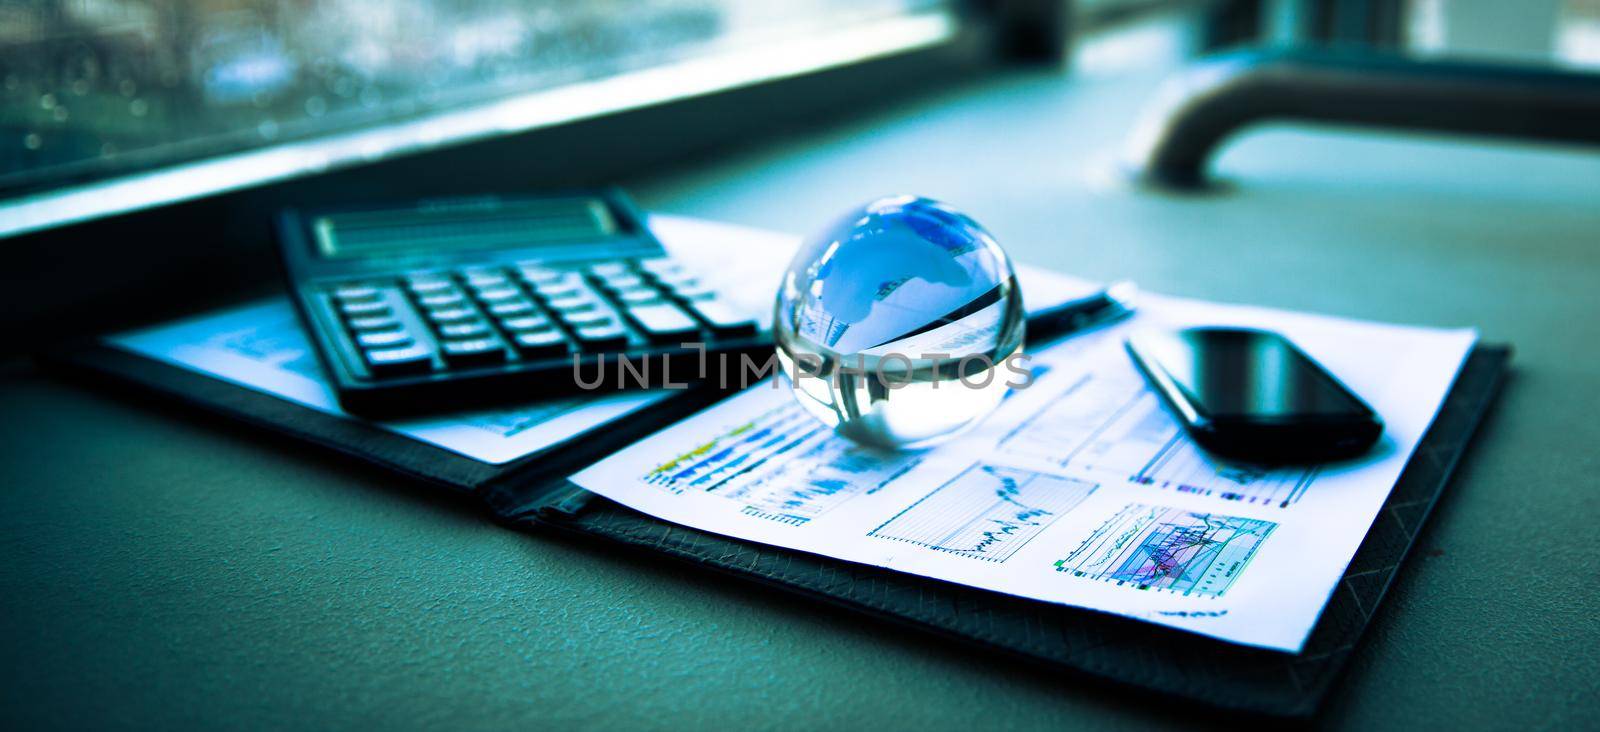 Business of financial analysis of workplace by SmartPhotoLab